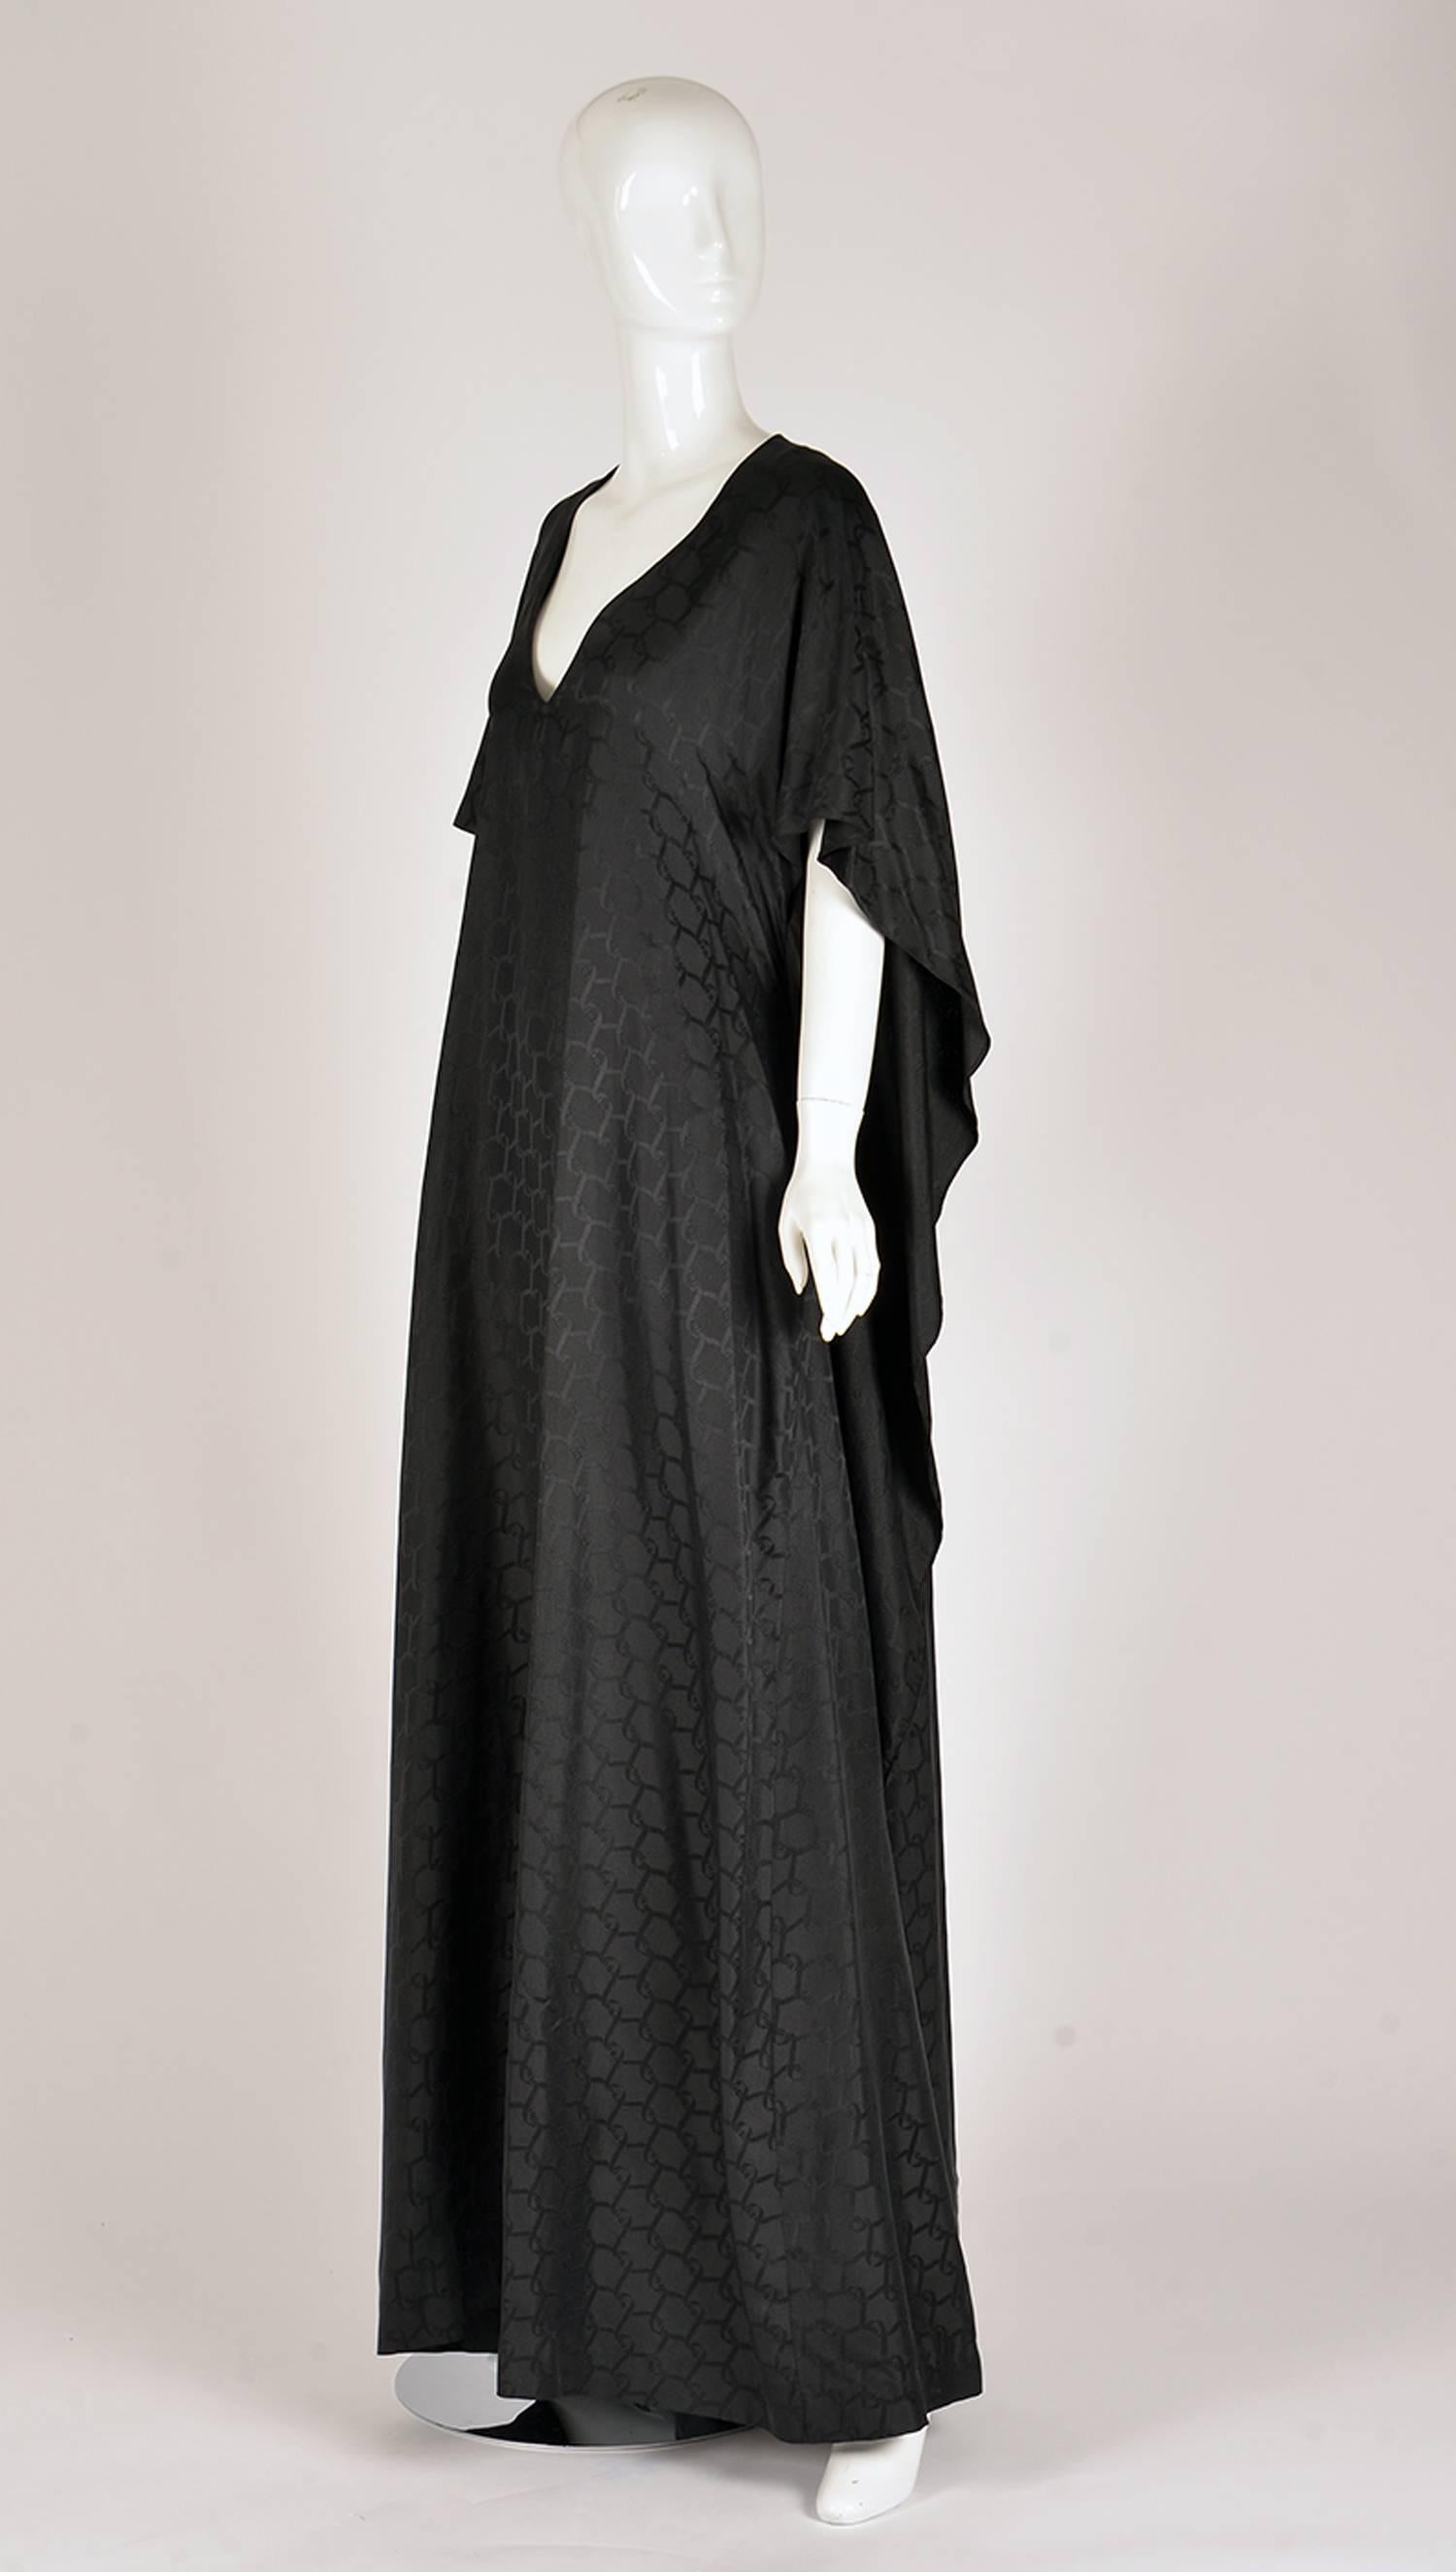 This Roberta di Camerino 1978 black silk caftan is magnificent! With a wrap waist band for the skirt underneath (back) the top cape-like piece is allowed to flow behind. The back is open underneath the cape. This dress has a V neck as the main